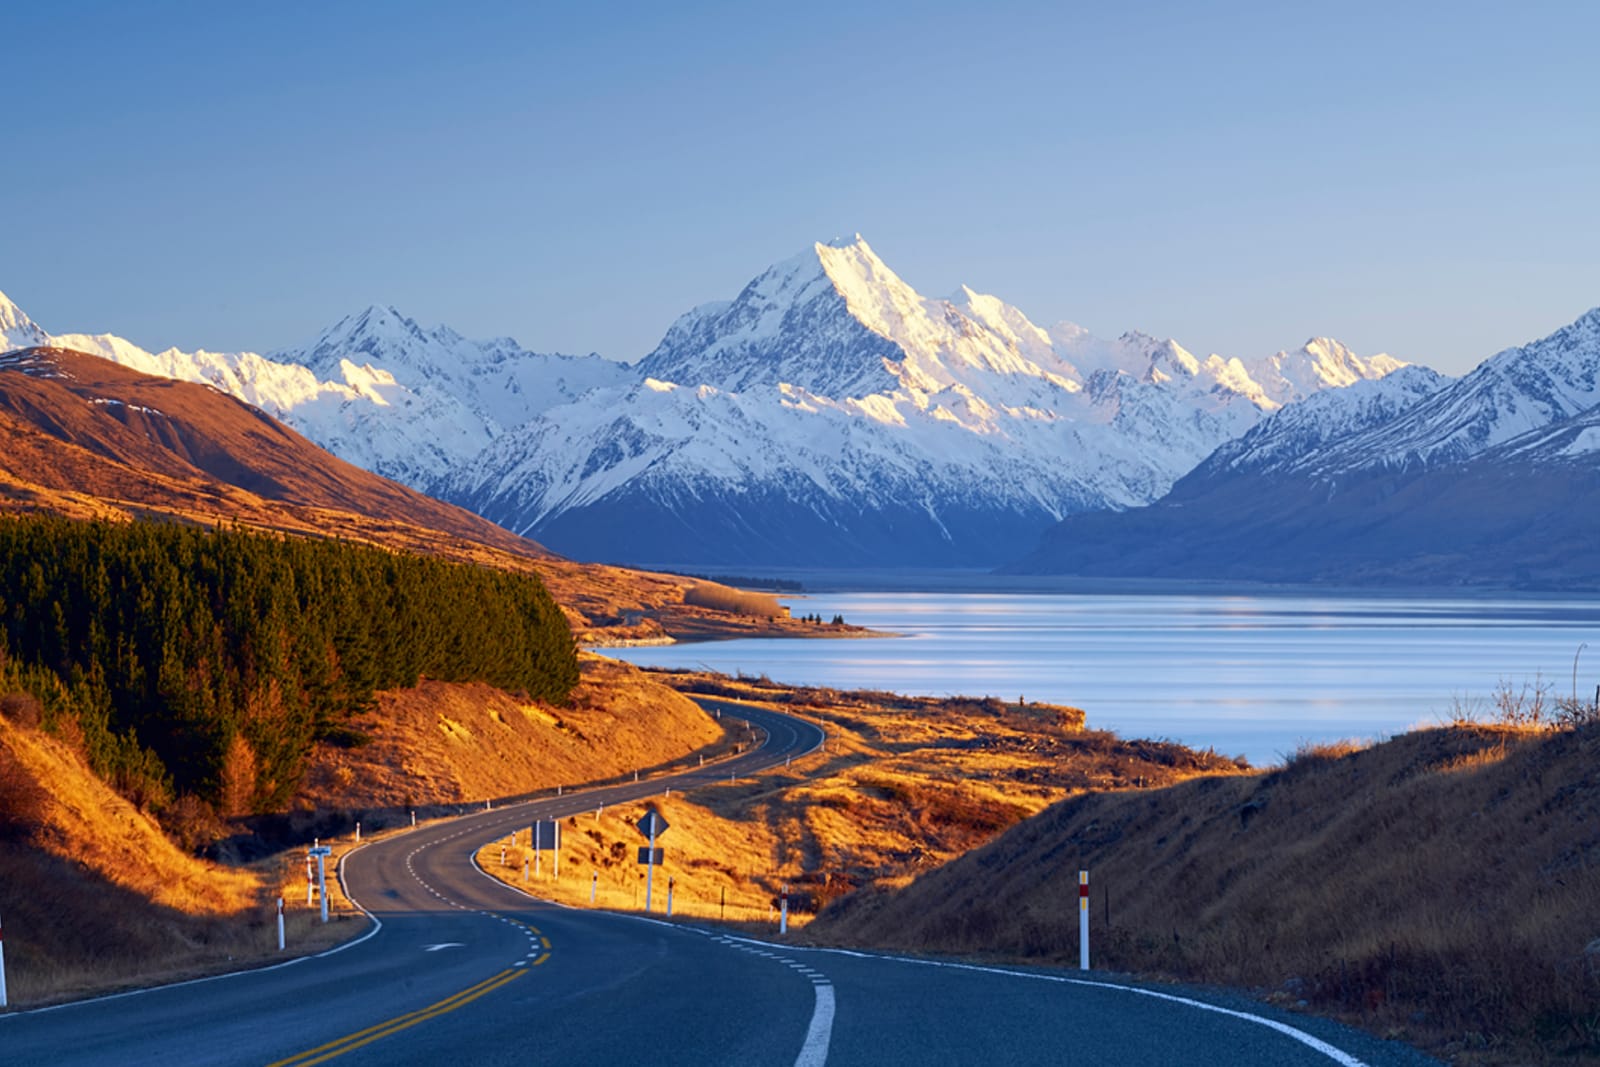 The Southern Scenic Route on New Zealand's South Island is one of the world's best road trip routes